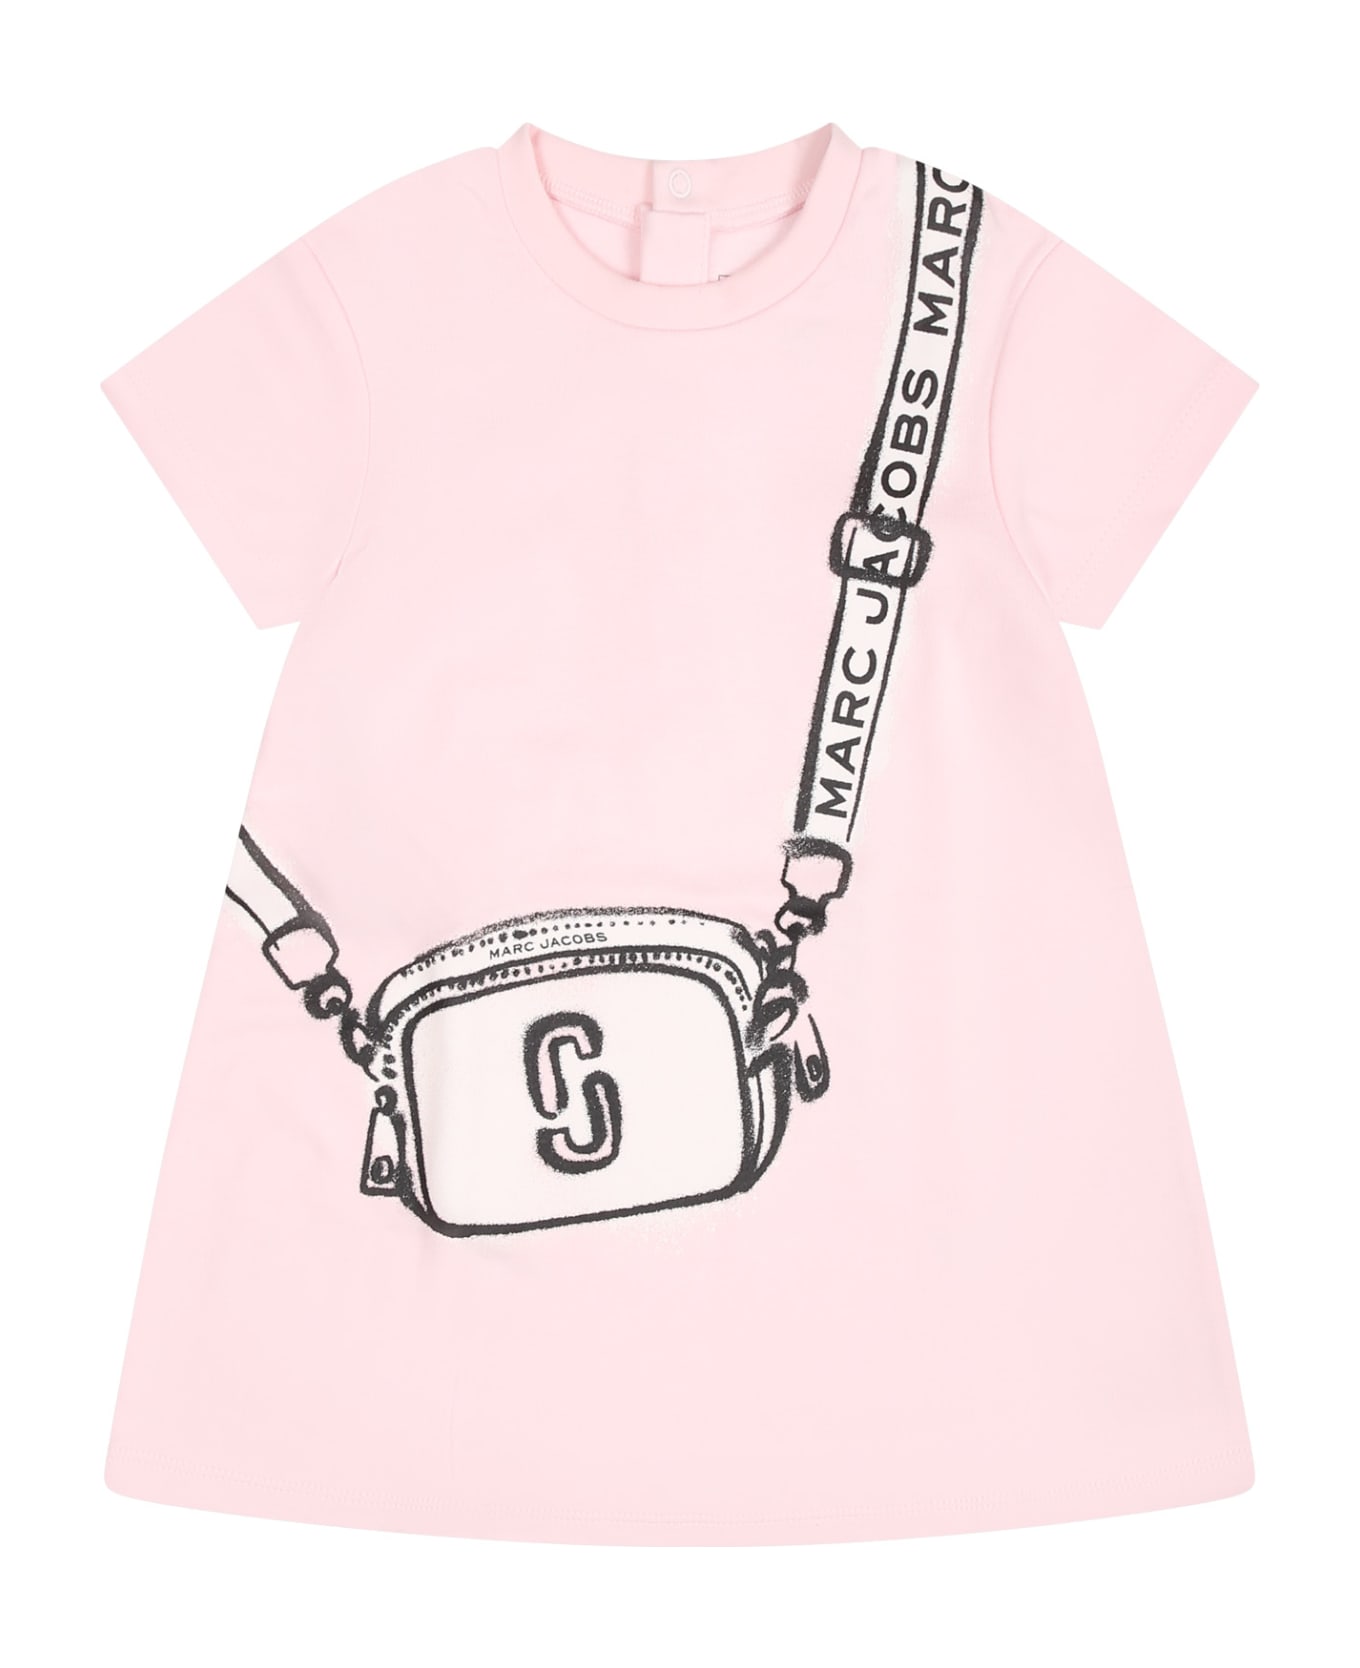 Marc Jacobs Pink Dress For Baby Girl With Iconic Bag - Pink ウェア